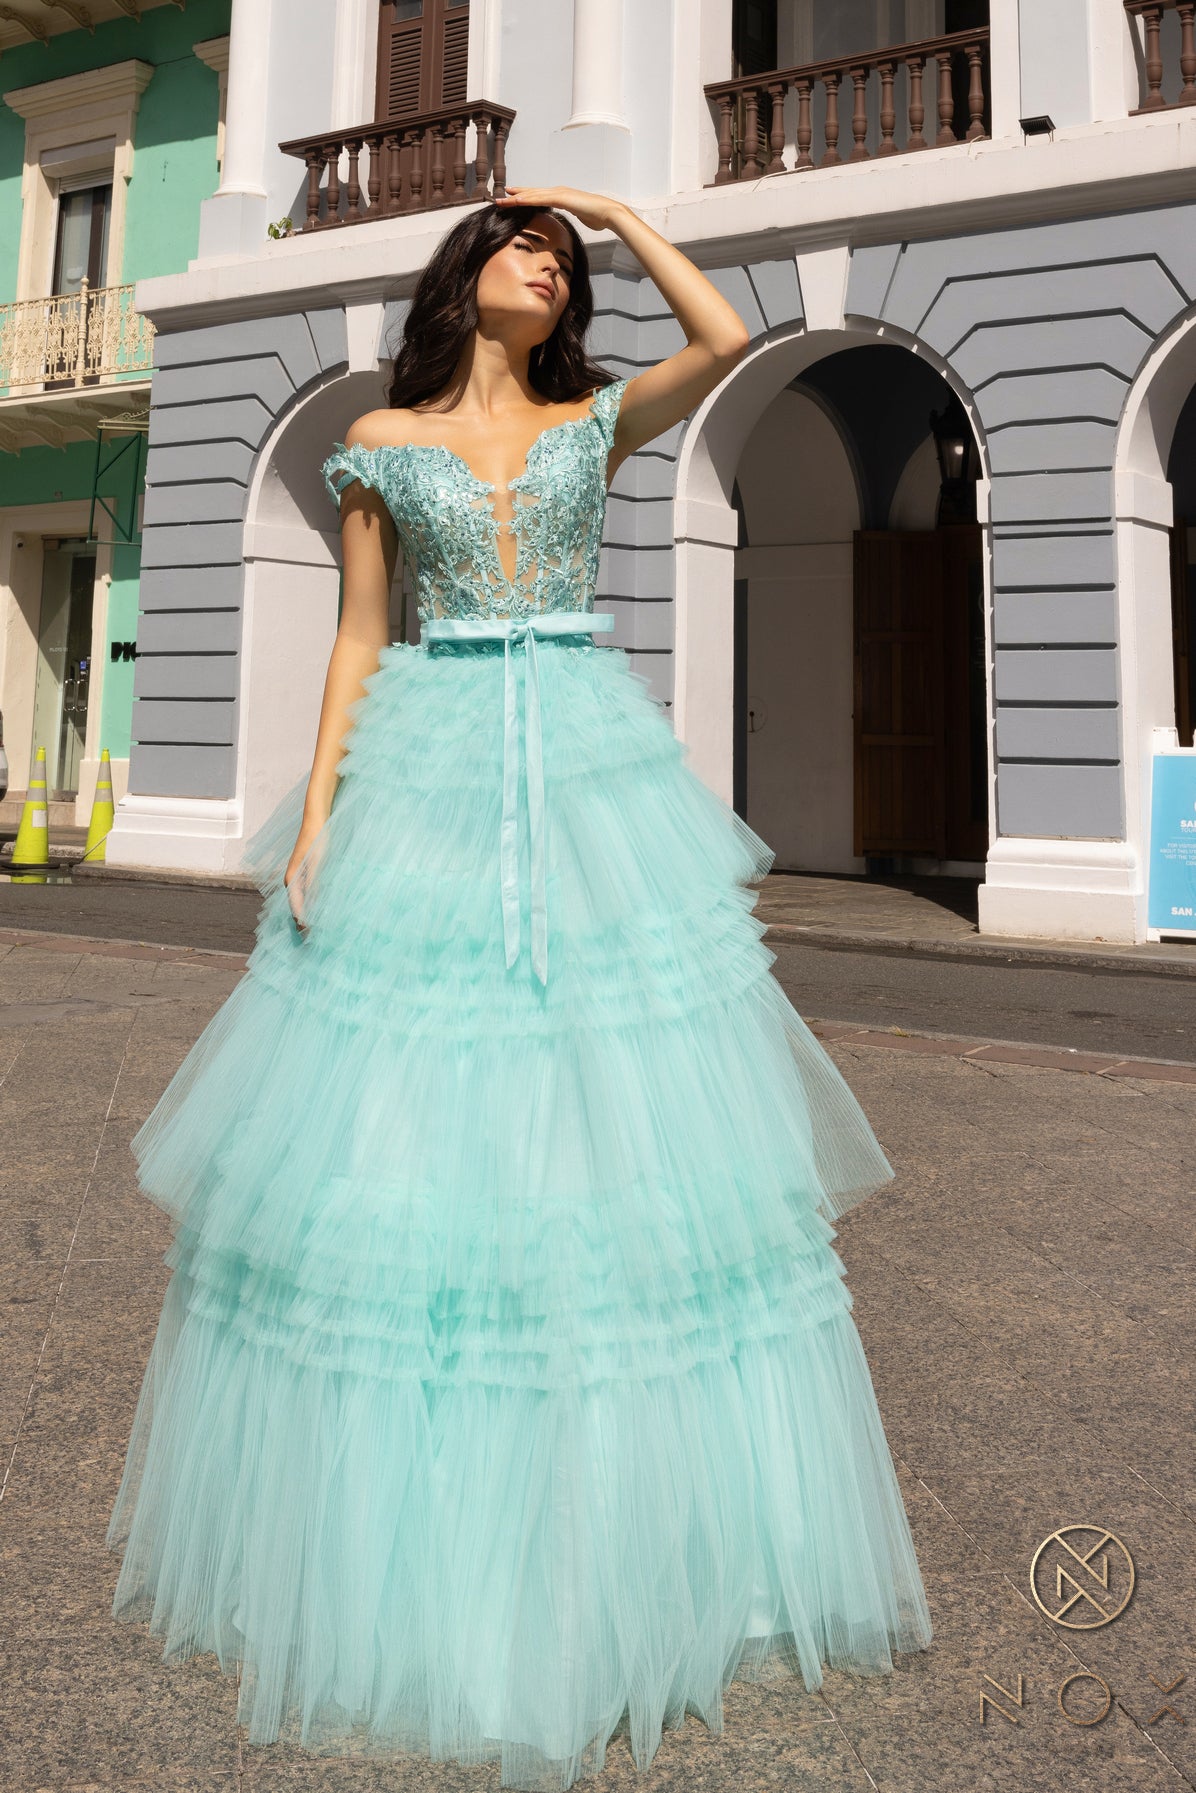 Experience the elegance and sophistication of the Nox Anabel E1293 Prom Dress. With a stunning A-line silhouette, pleated tulle layers, and sheer lace embellished Corset , this dress will make heads turn. Complete with an off-shoulder design and a delicate bow, this dress is perfect for a prom or any formal event.  Sizes: 0-16  Colors: Blue, Mauve, Mint Green, Periwinkle